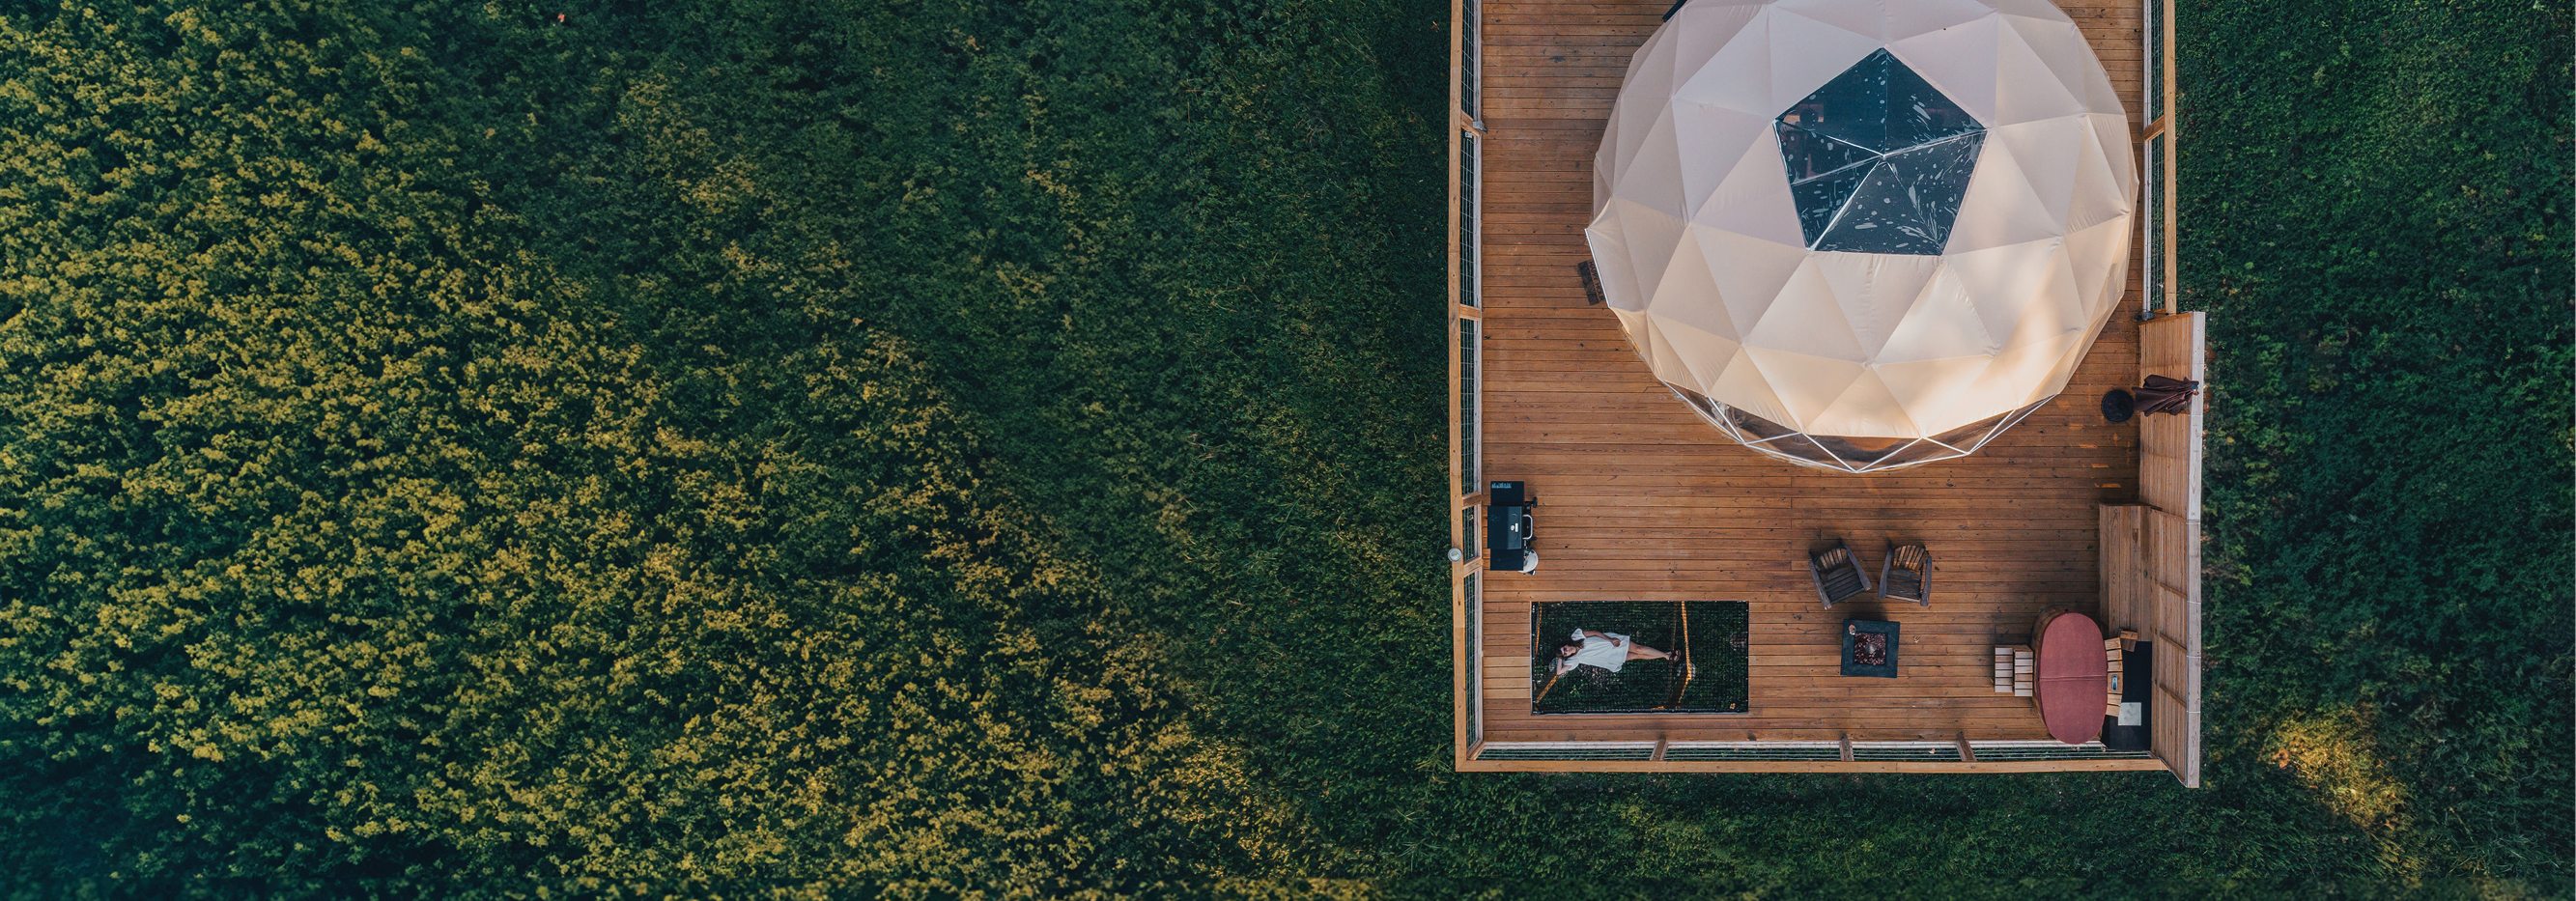 Aerial photo of a yurt in a field.